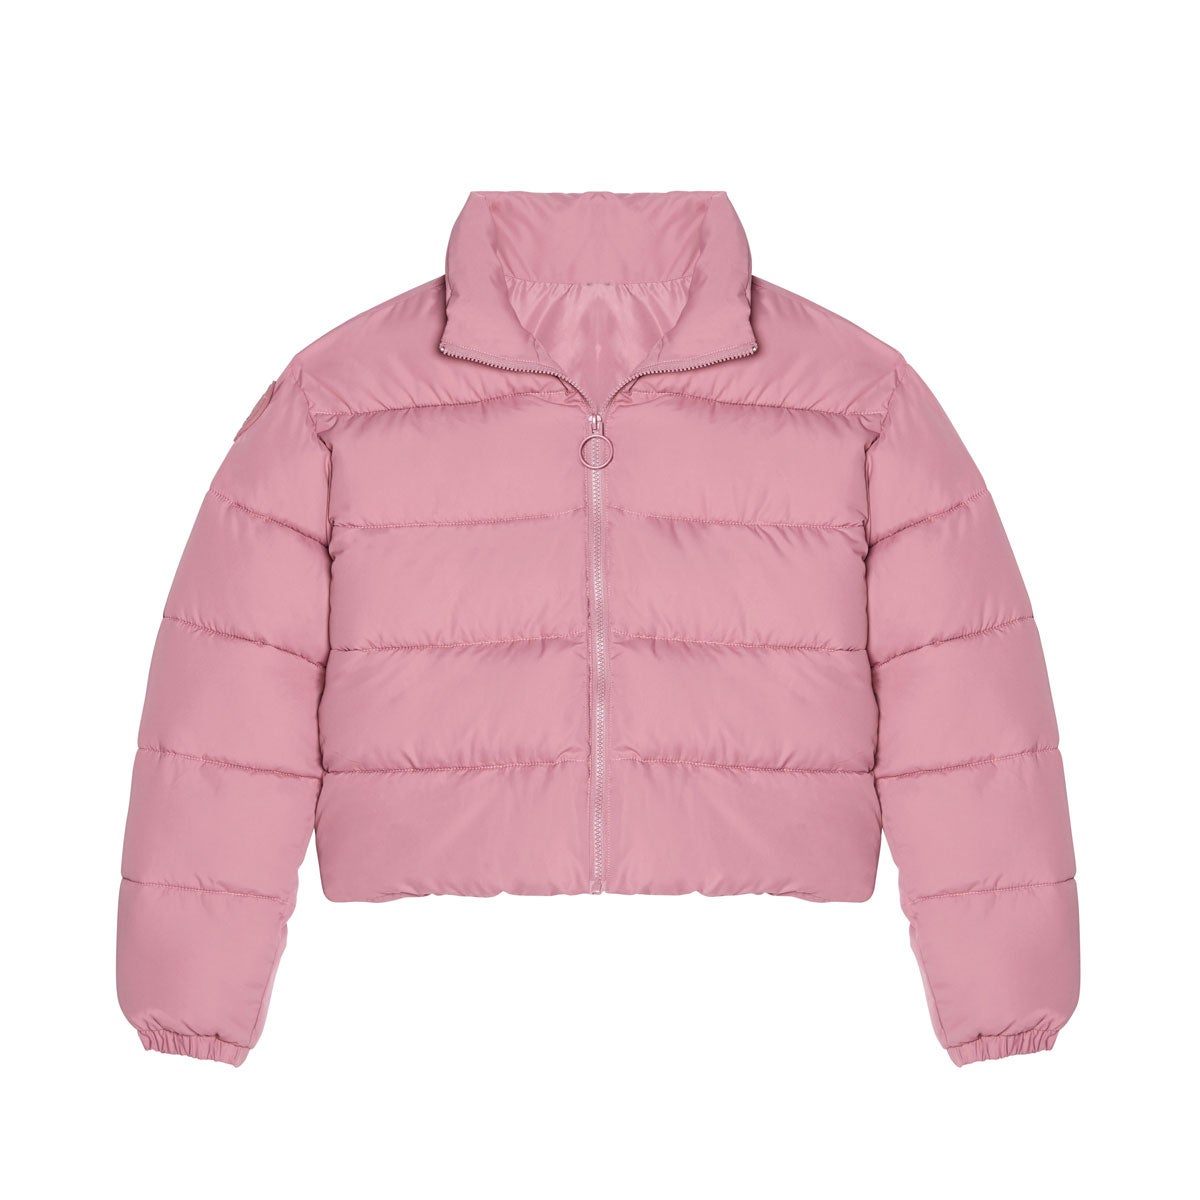 Shop The Best Puffer Jackets For This Up-And-Coming Winter | Essence